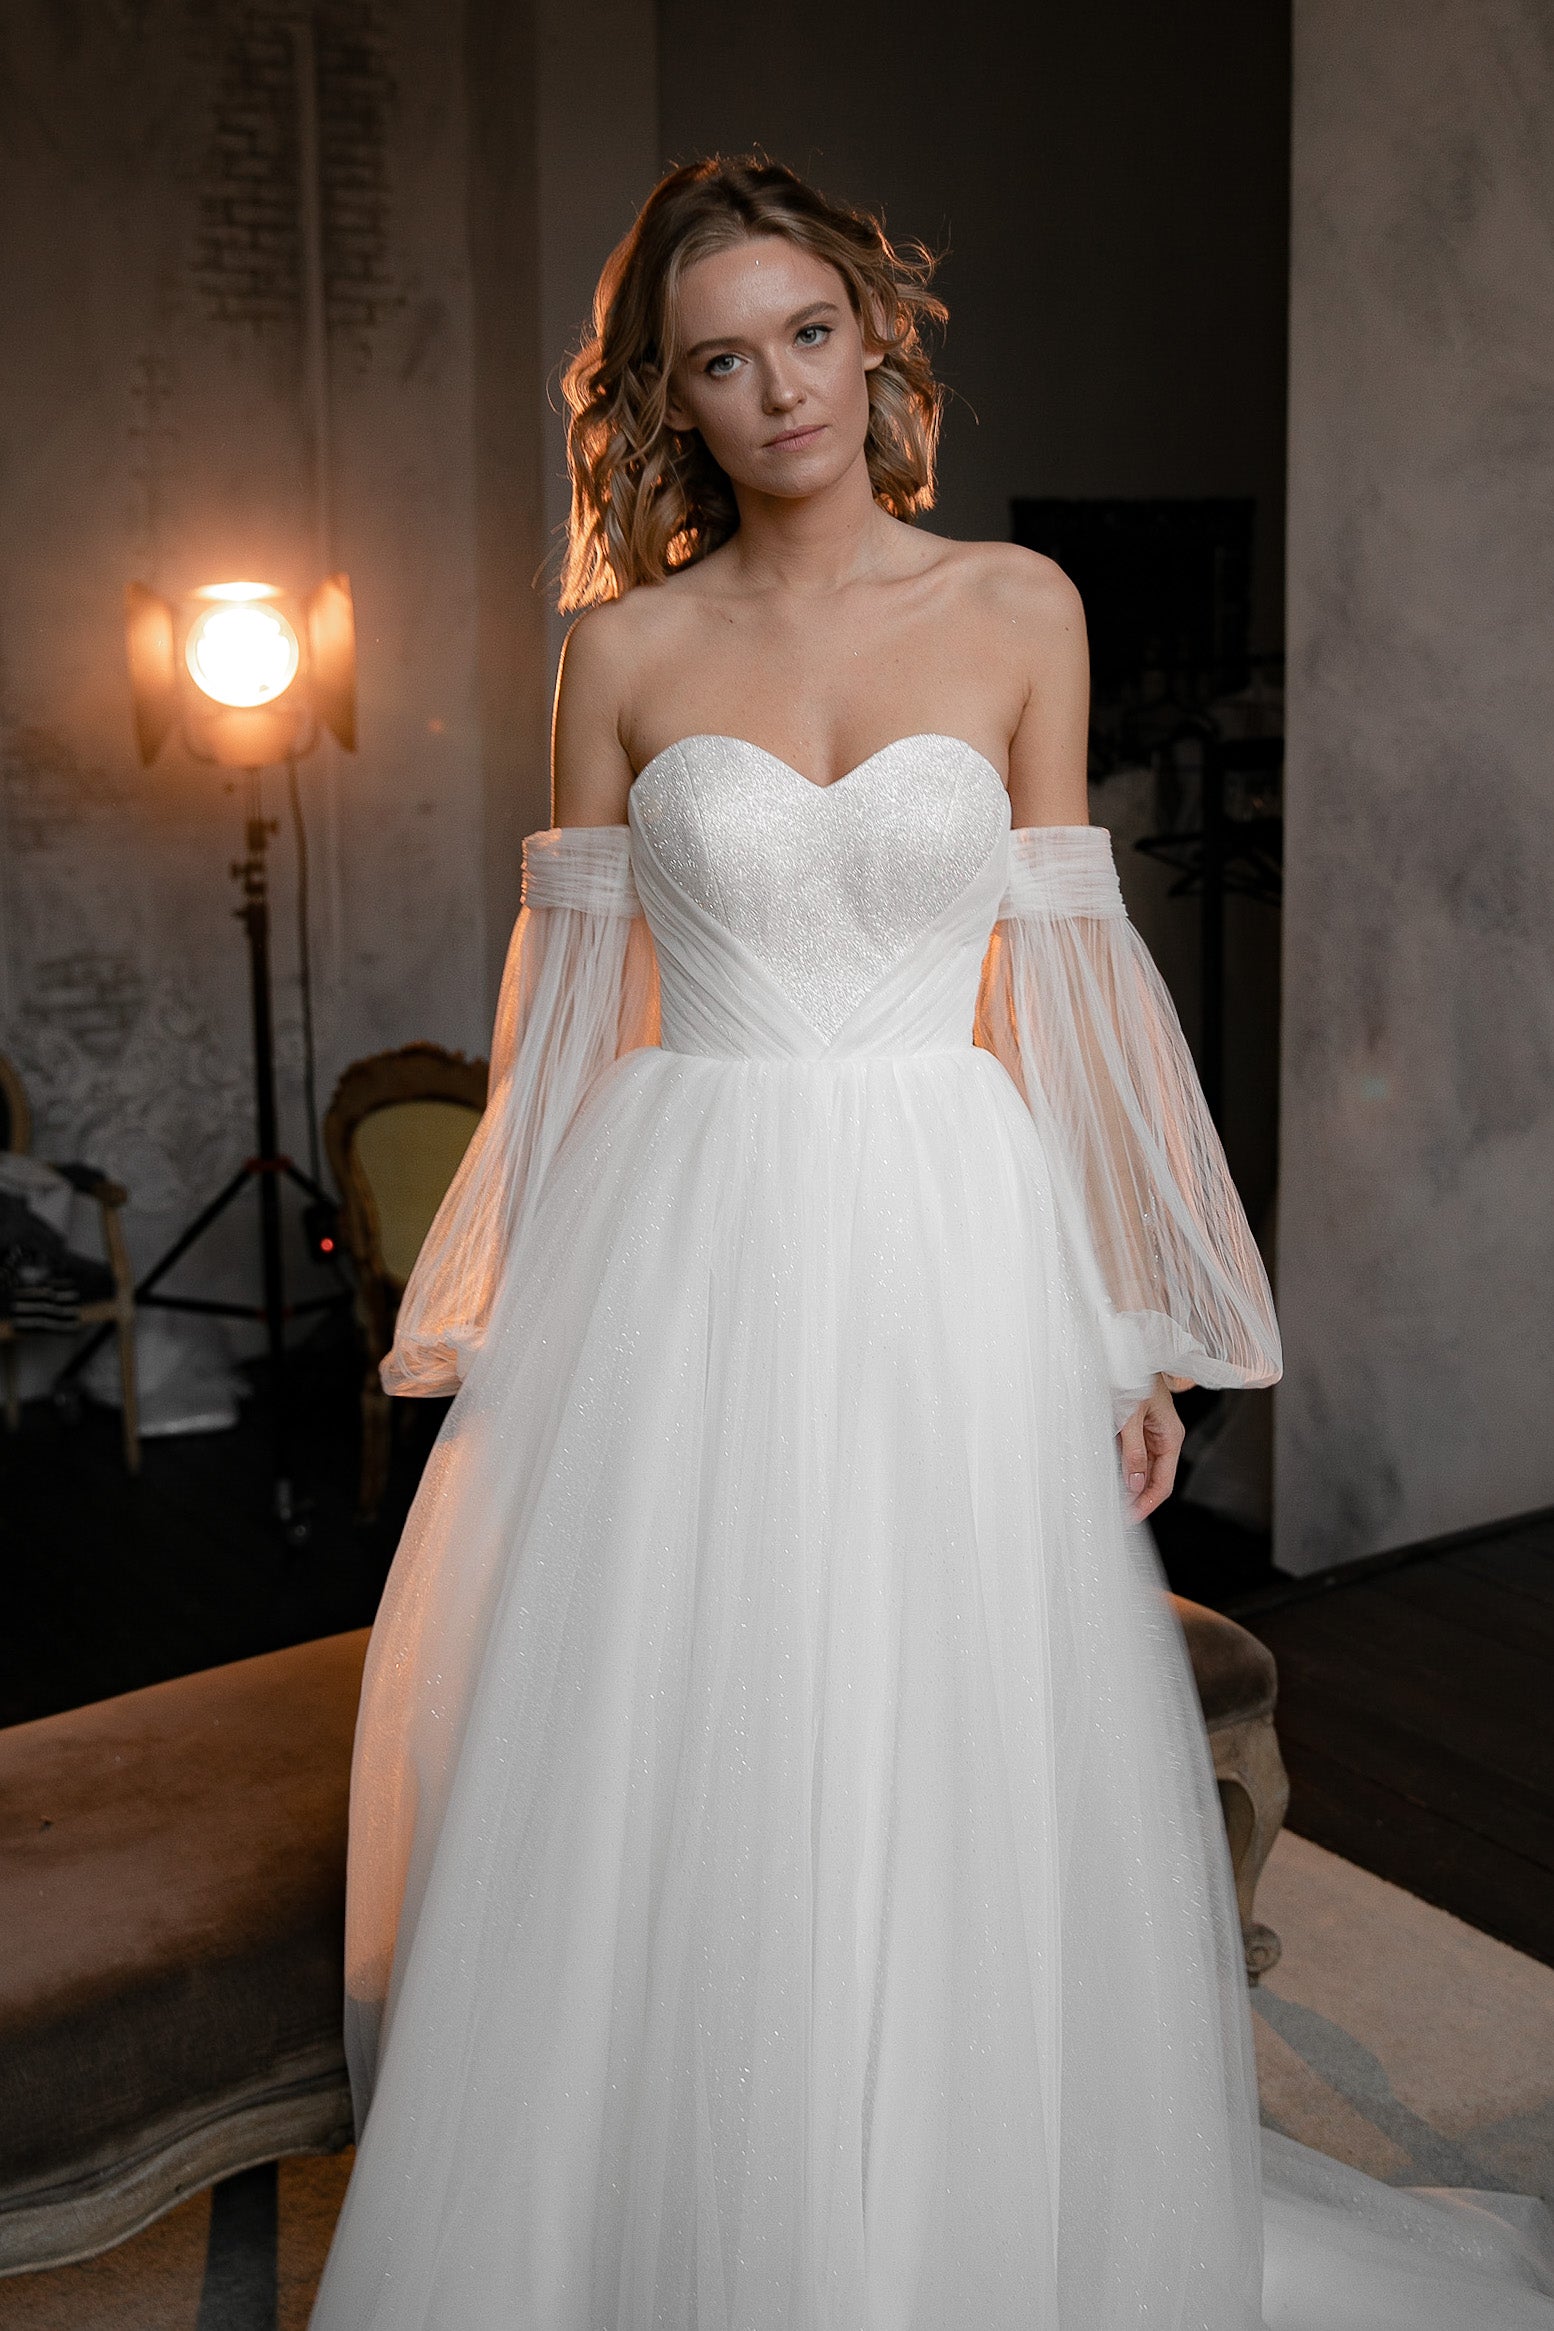 Wedding Dresses Under $500: Different Styles & Buying Guide